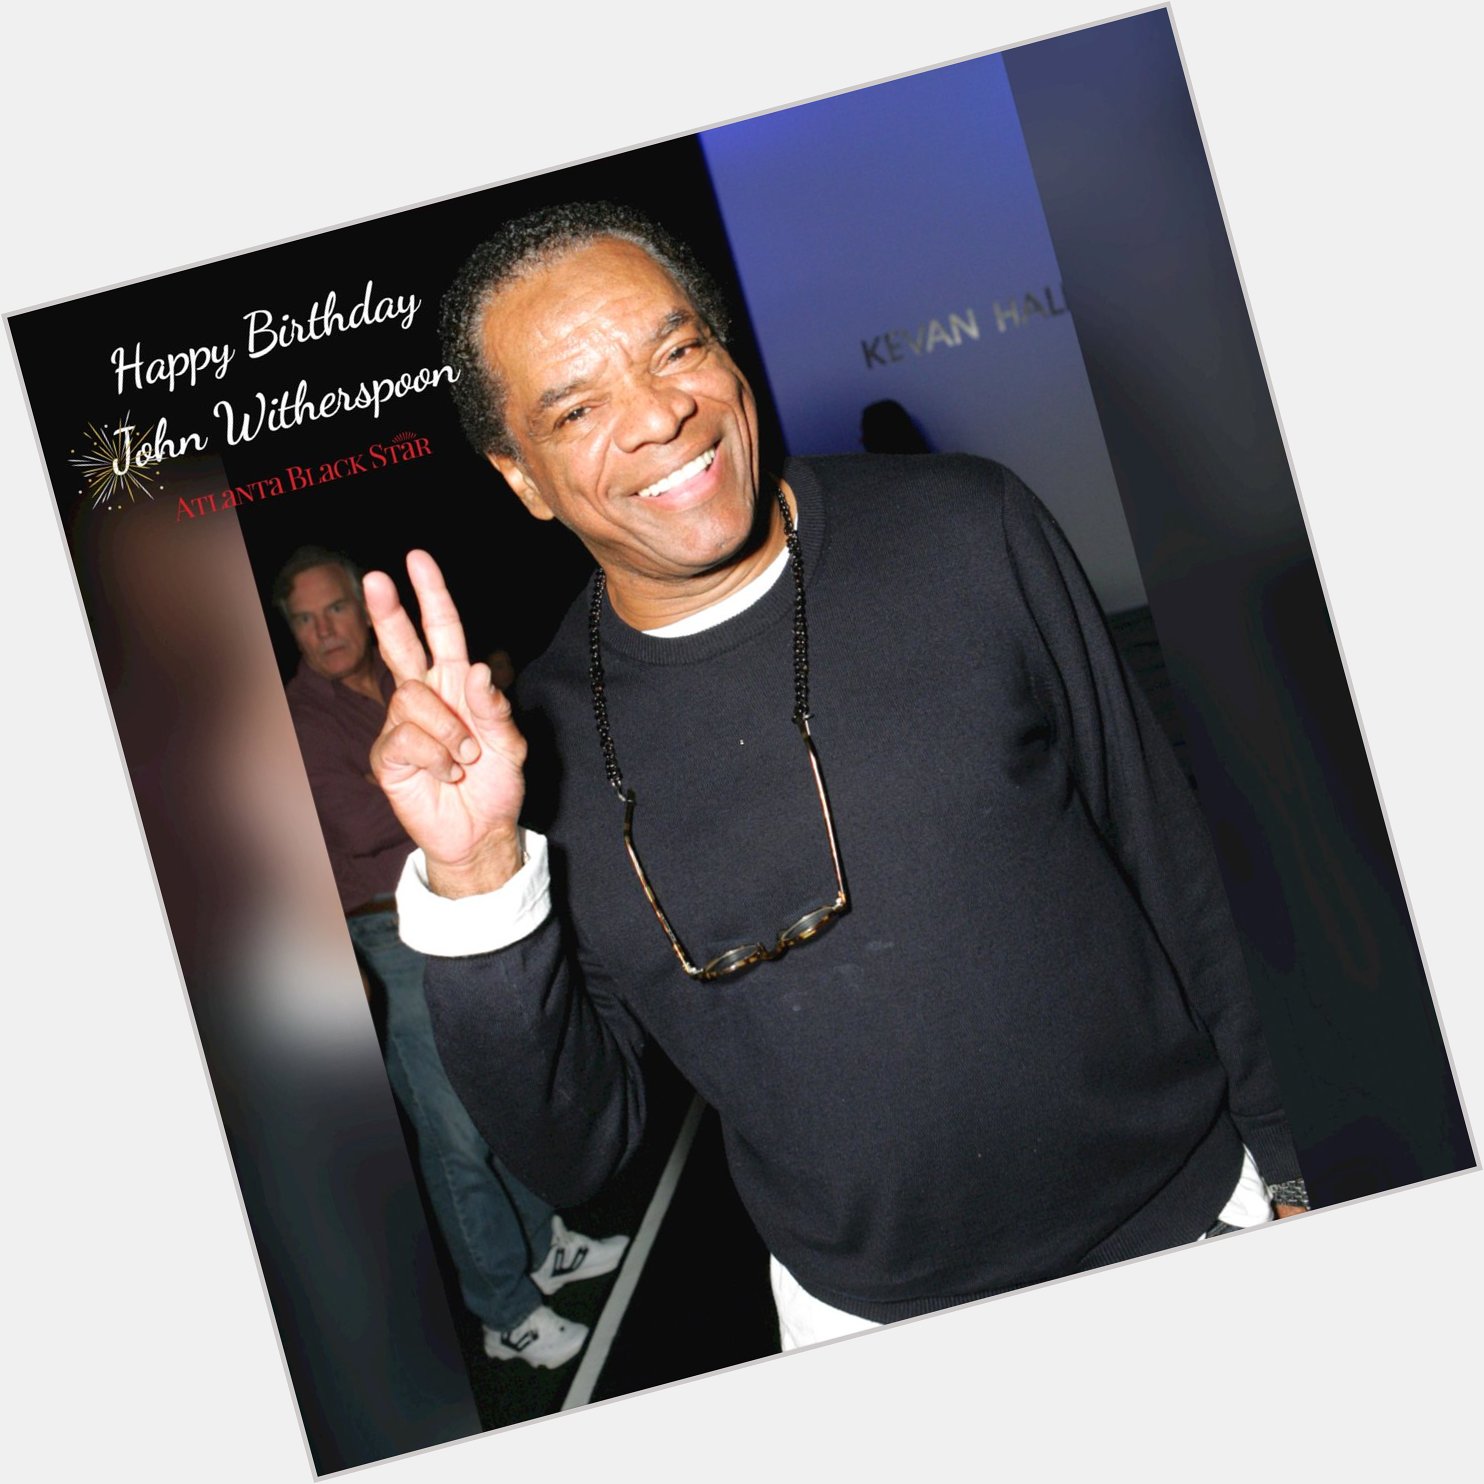 Happy Birthday to the late John Witherspoon! RIP  